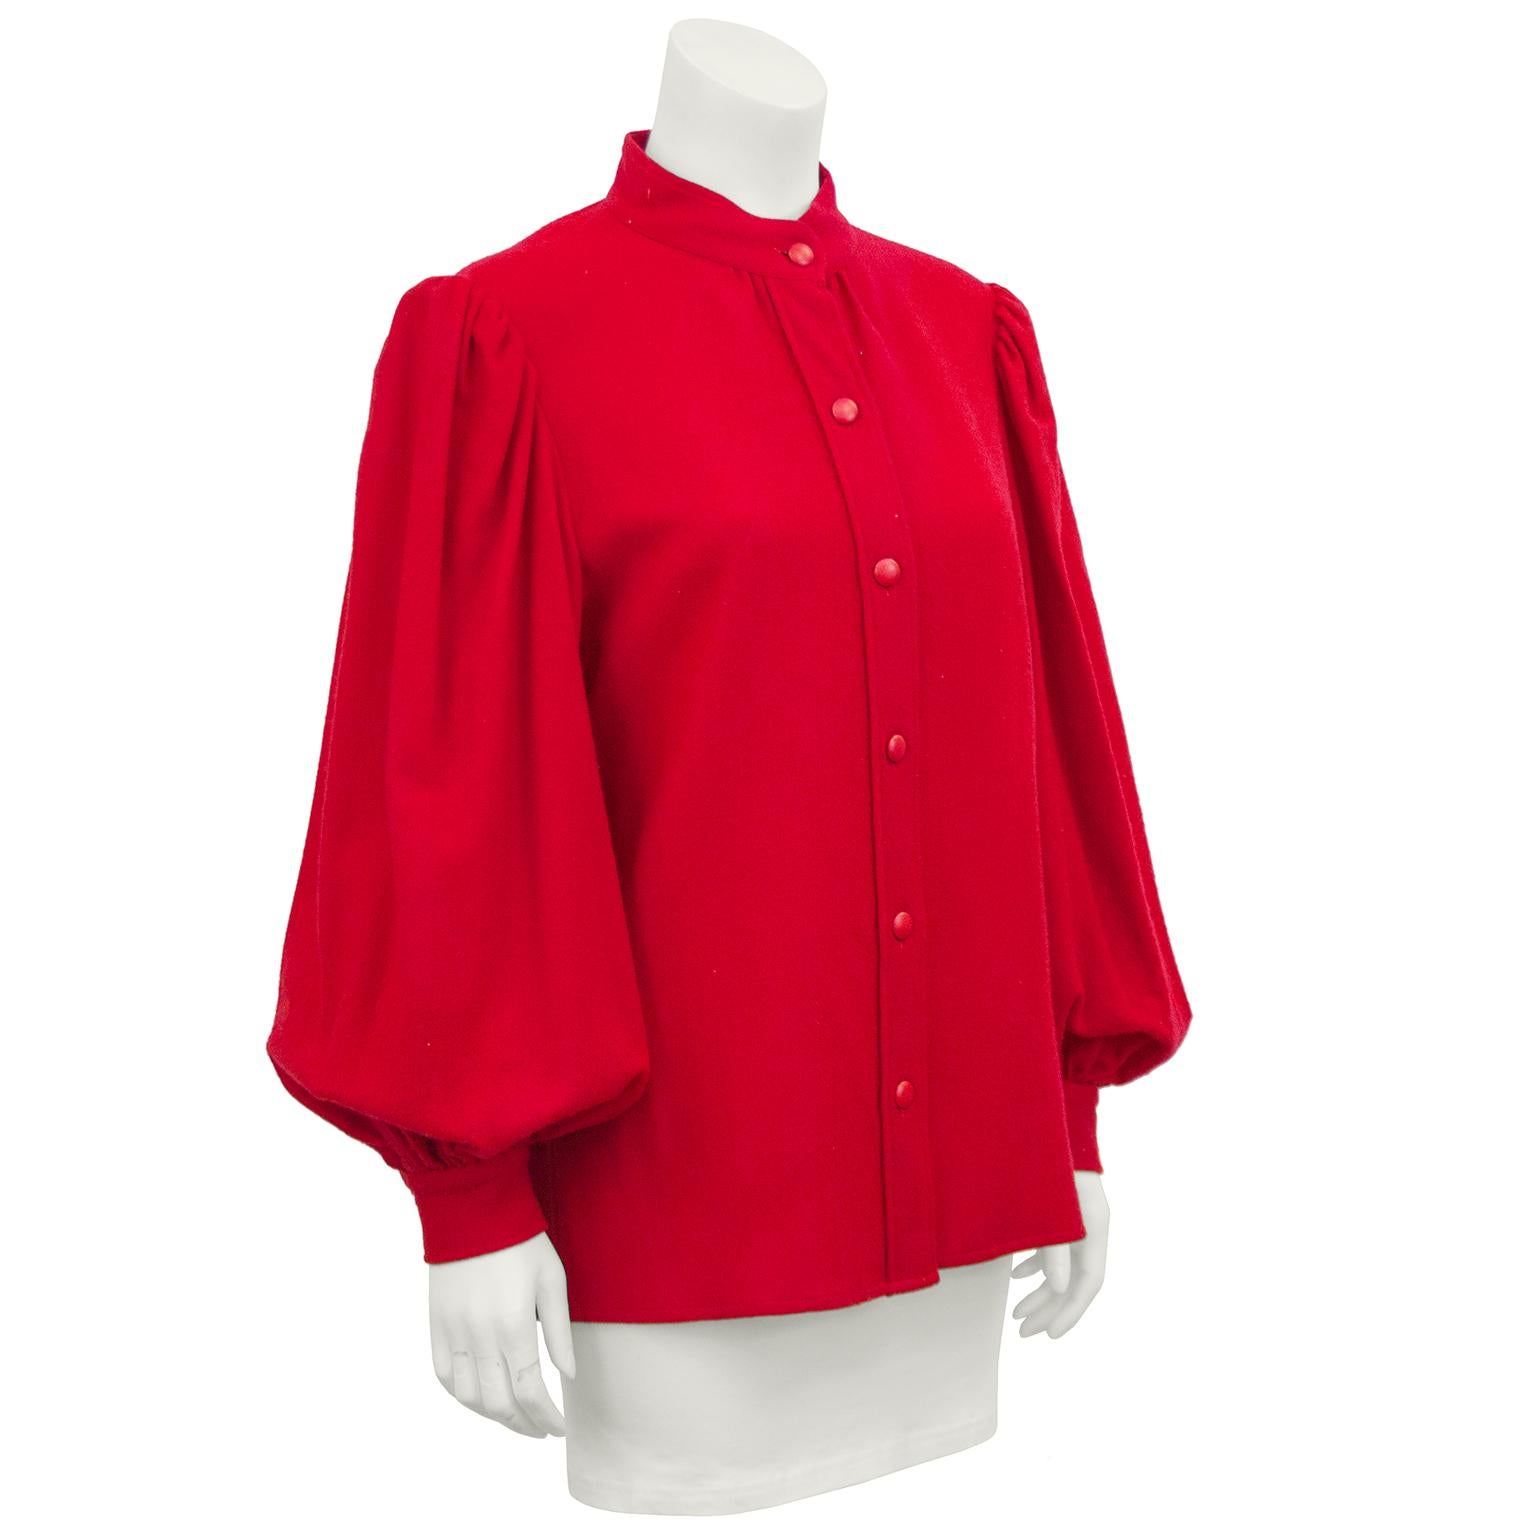 1960s YSL Rive Gauche label red wool balloon sleeve shirt. Mandarin style collar has a slight imperfection. Red plastic buttons down the front and on the cuffs. In very good vintage condition. Fits like a US 6-8.